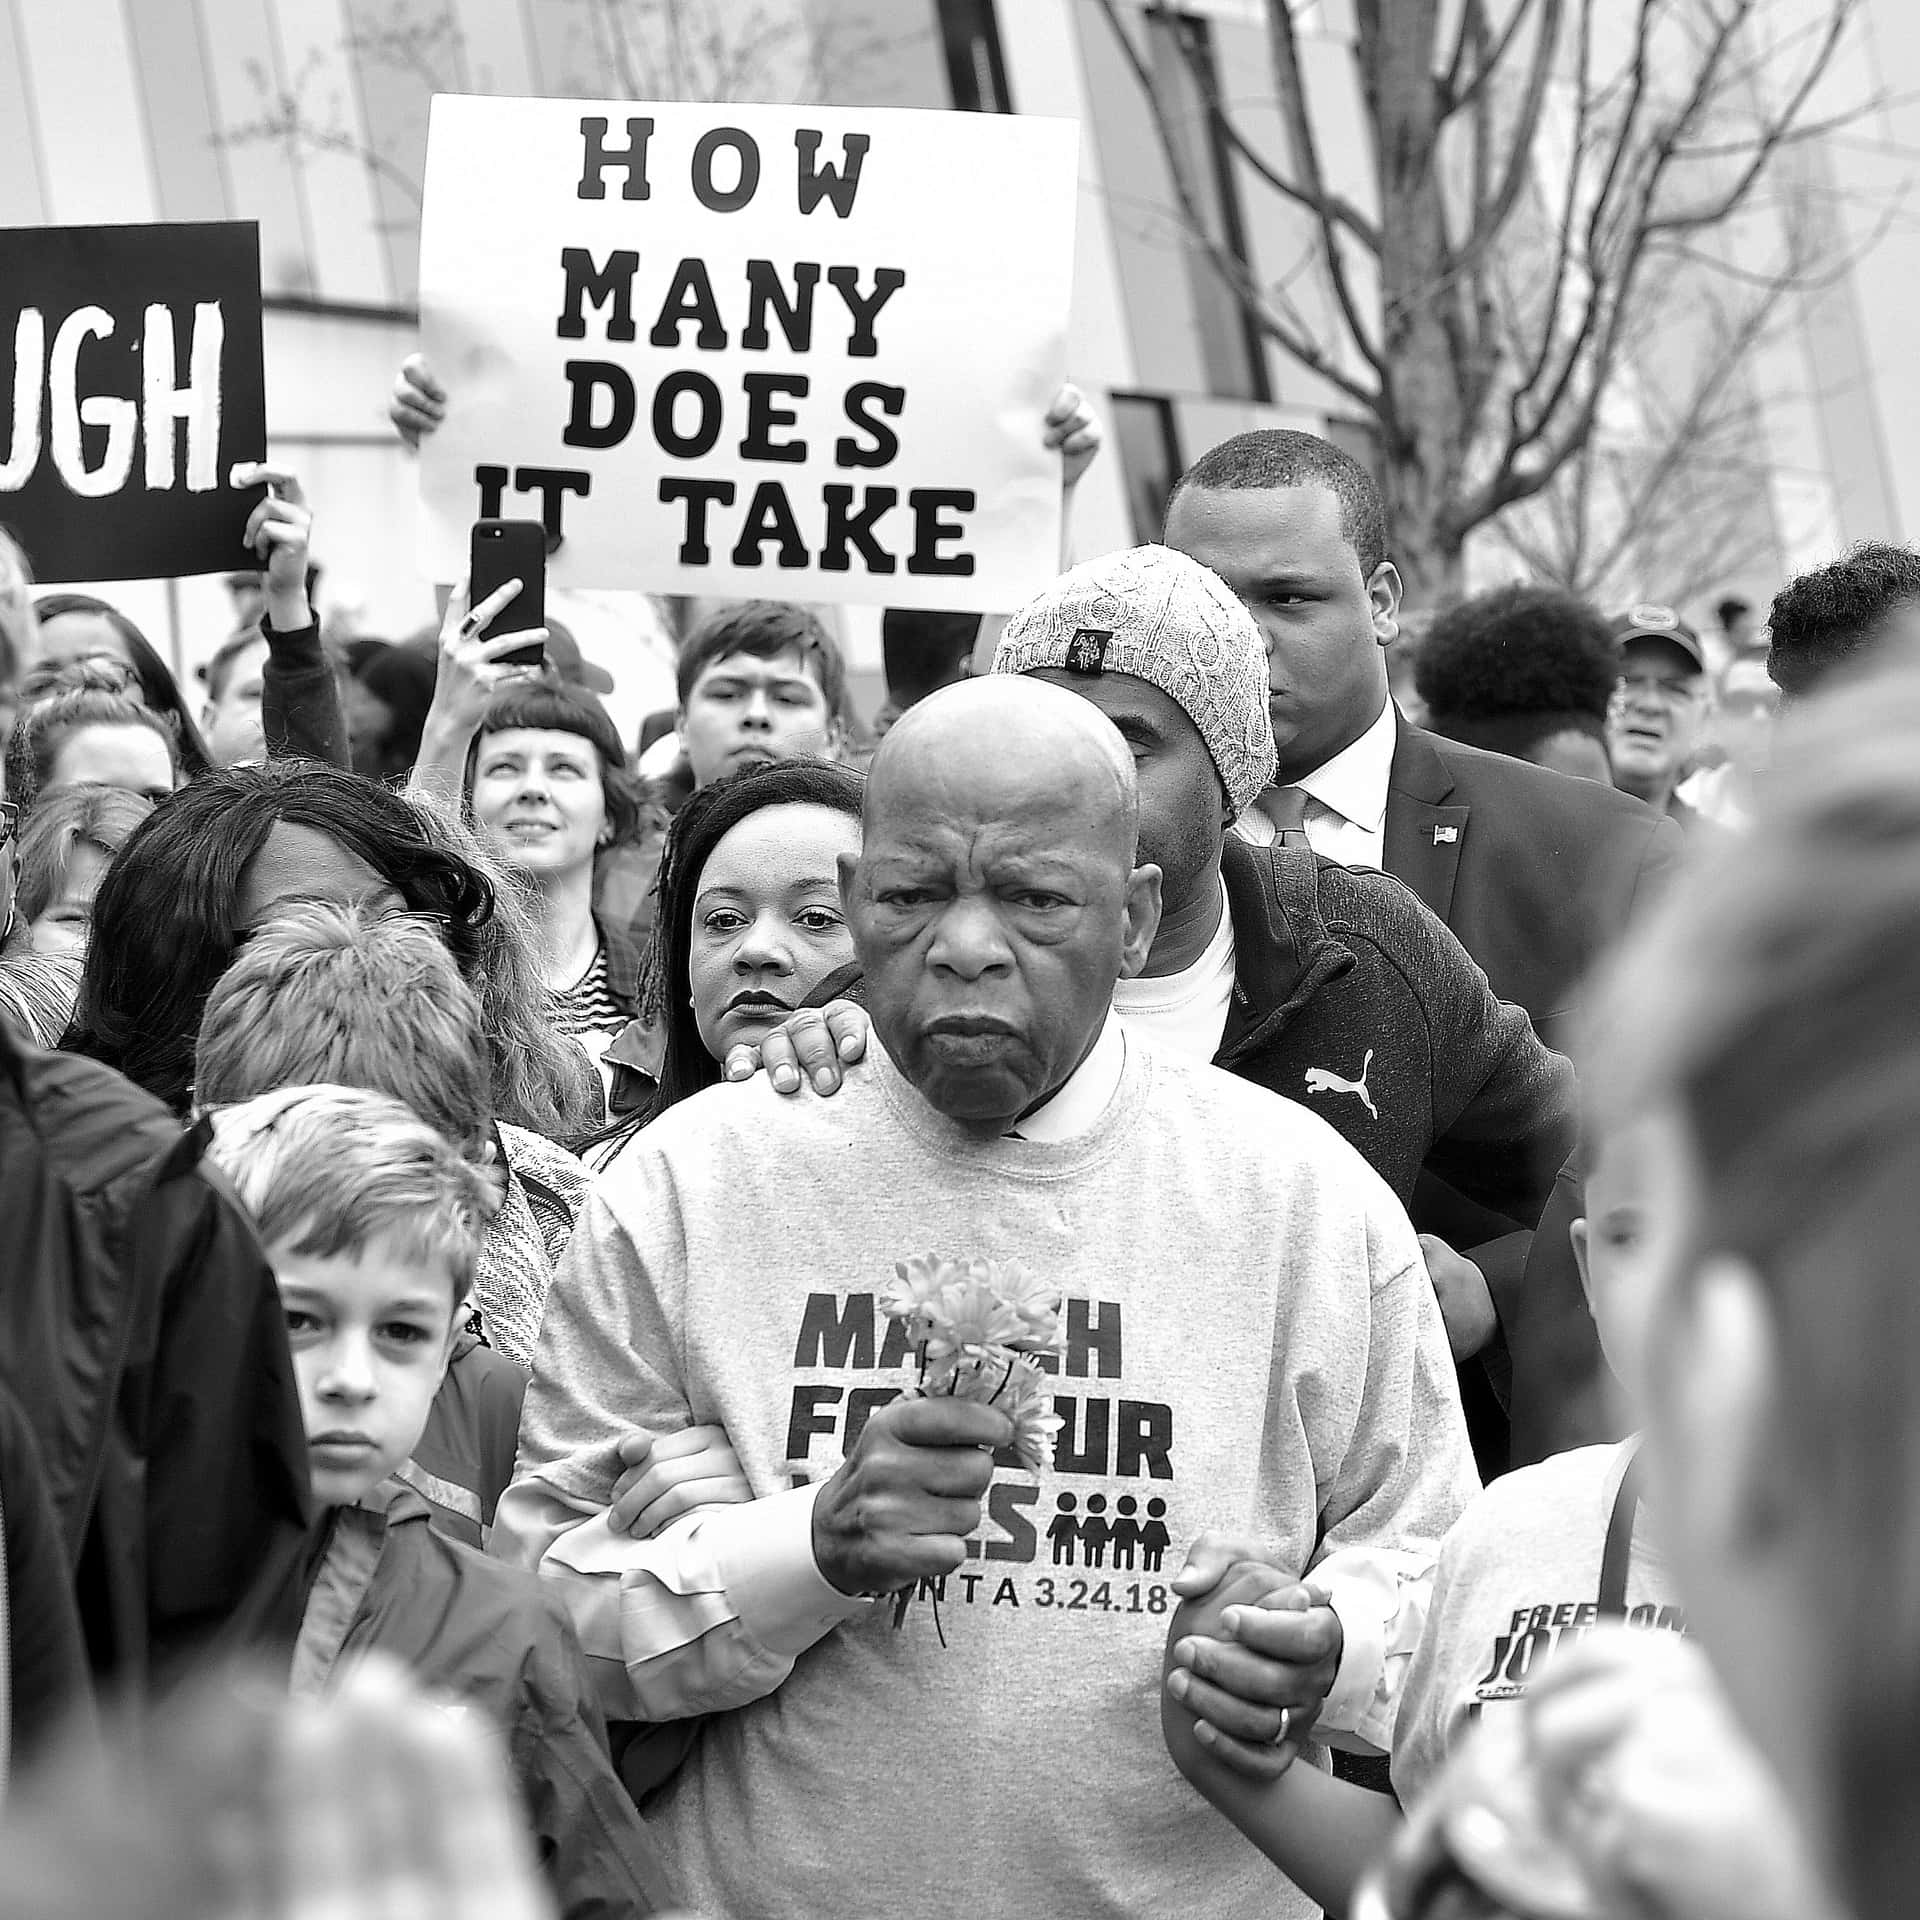 John Lewis at a Protest March Wallpaper